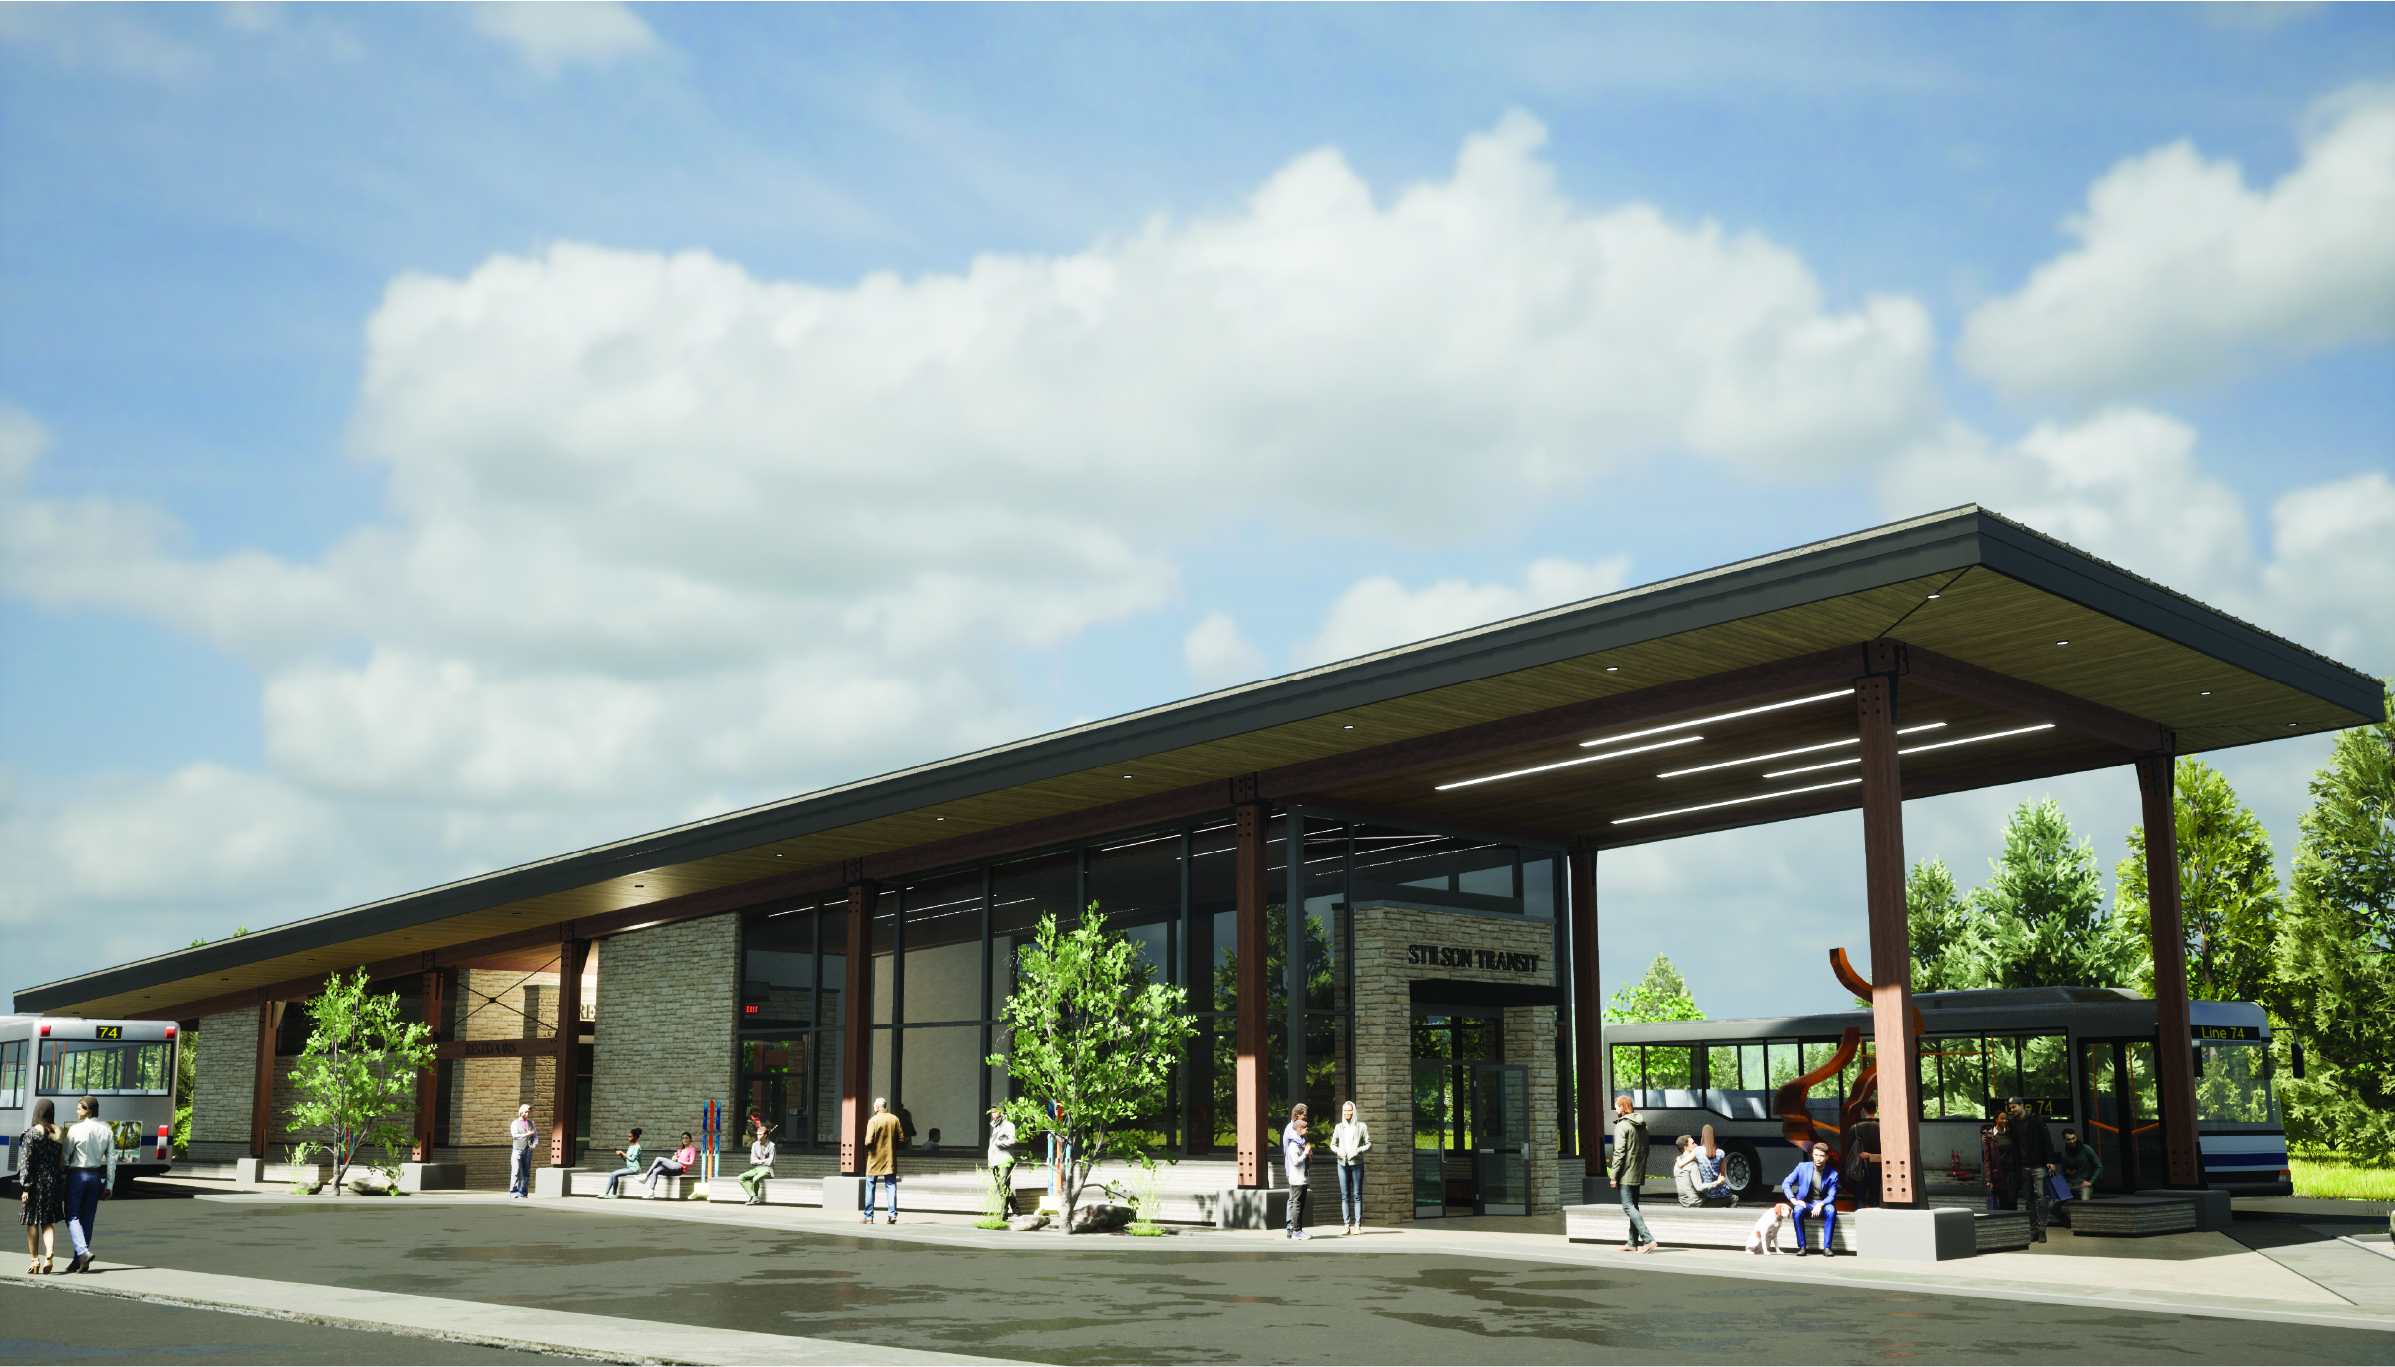 Rendering of the exterior of the Stilson Transit Center